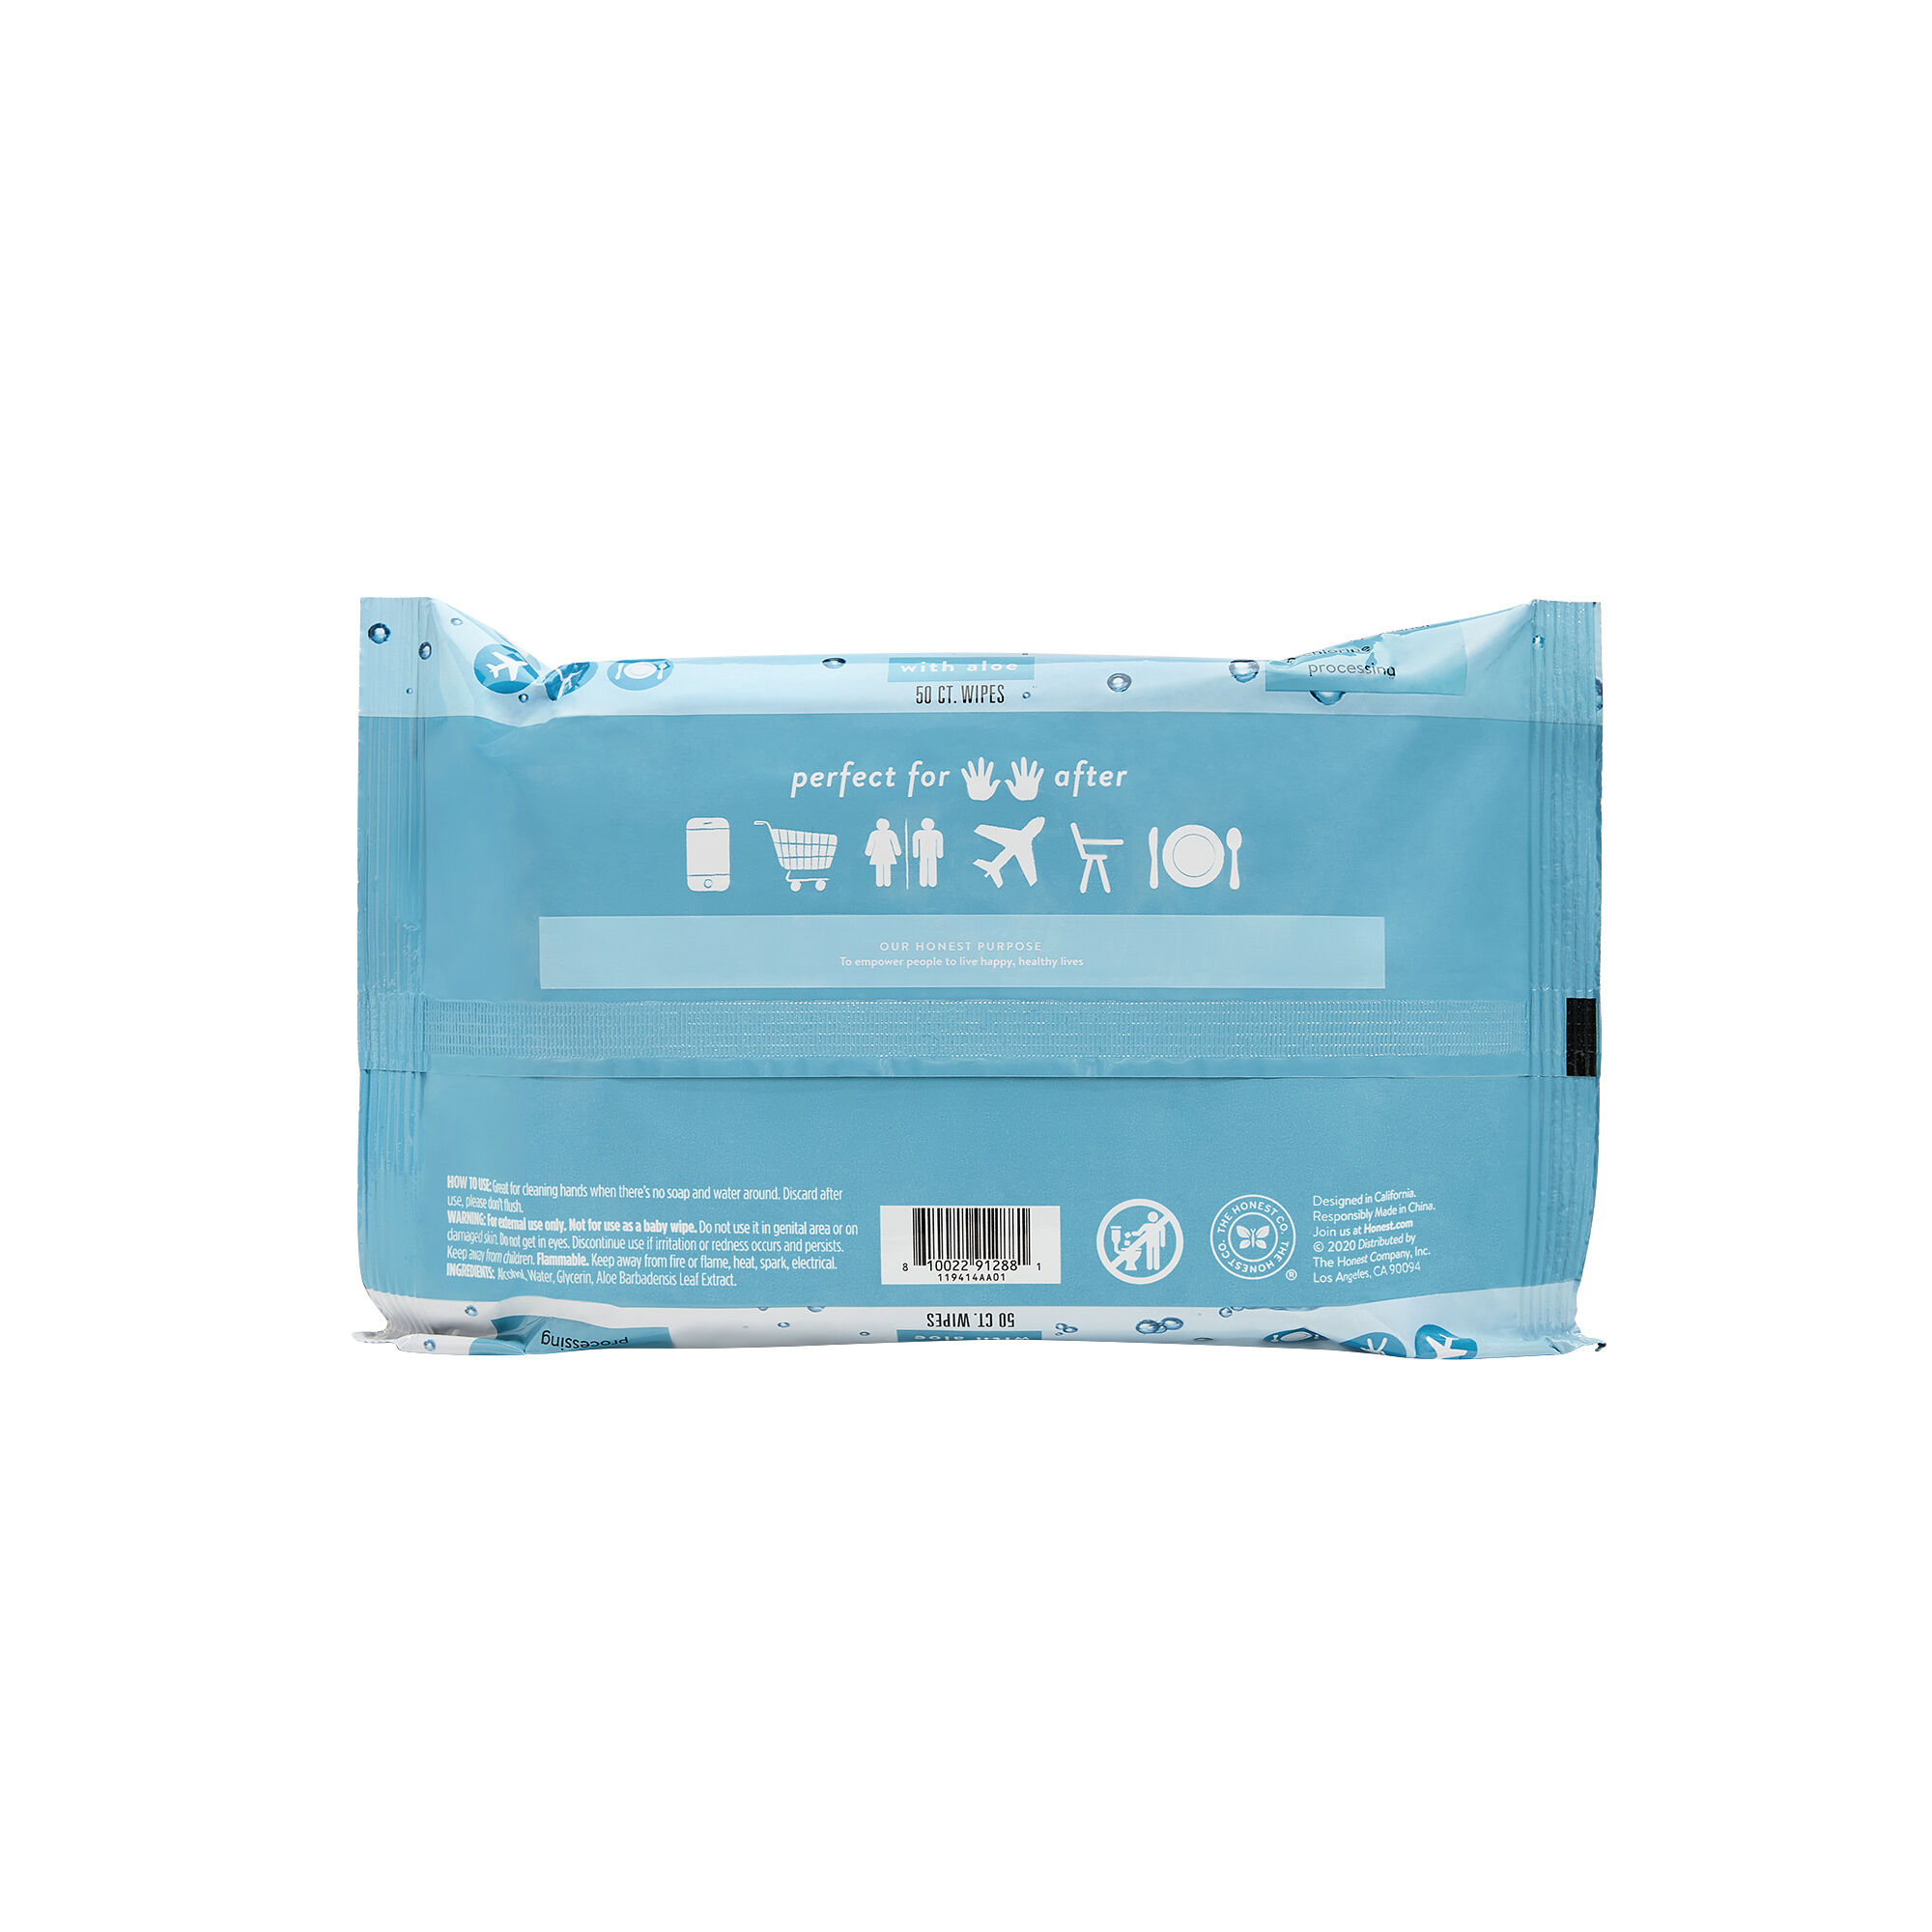 Sanitizing Alcohol Wipes, 50 Count